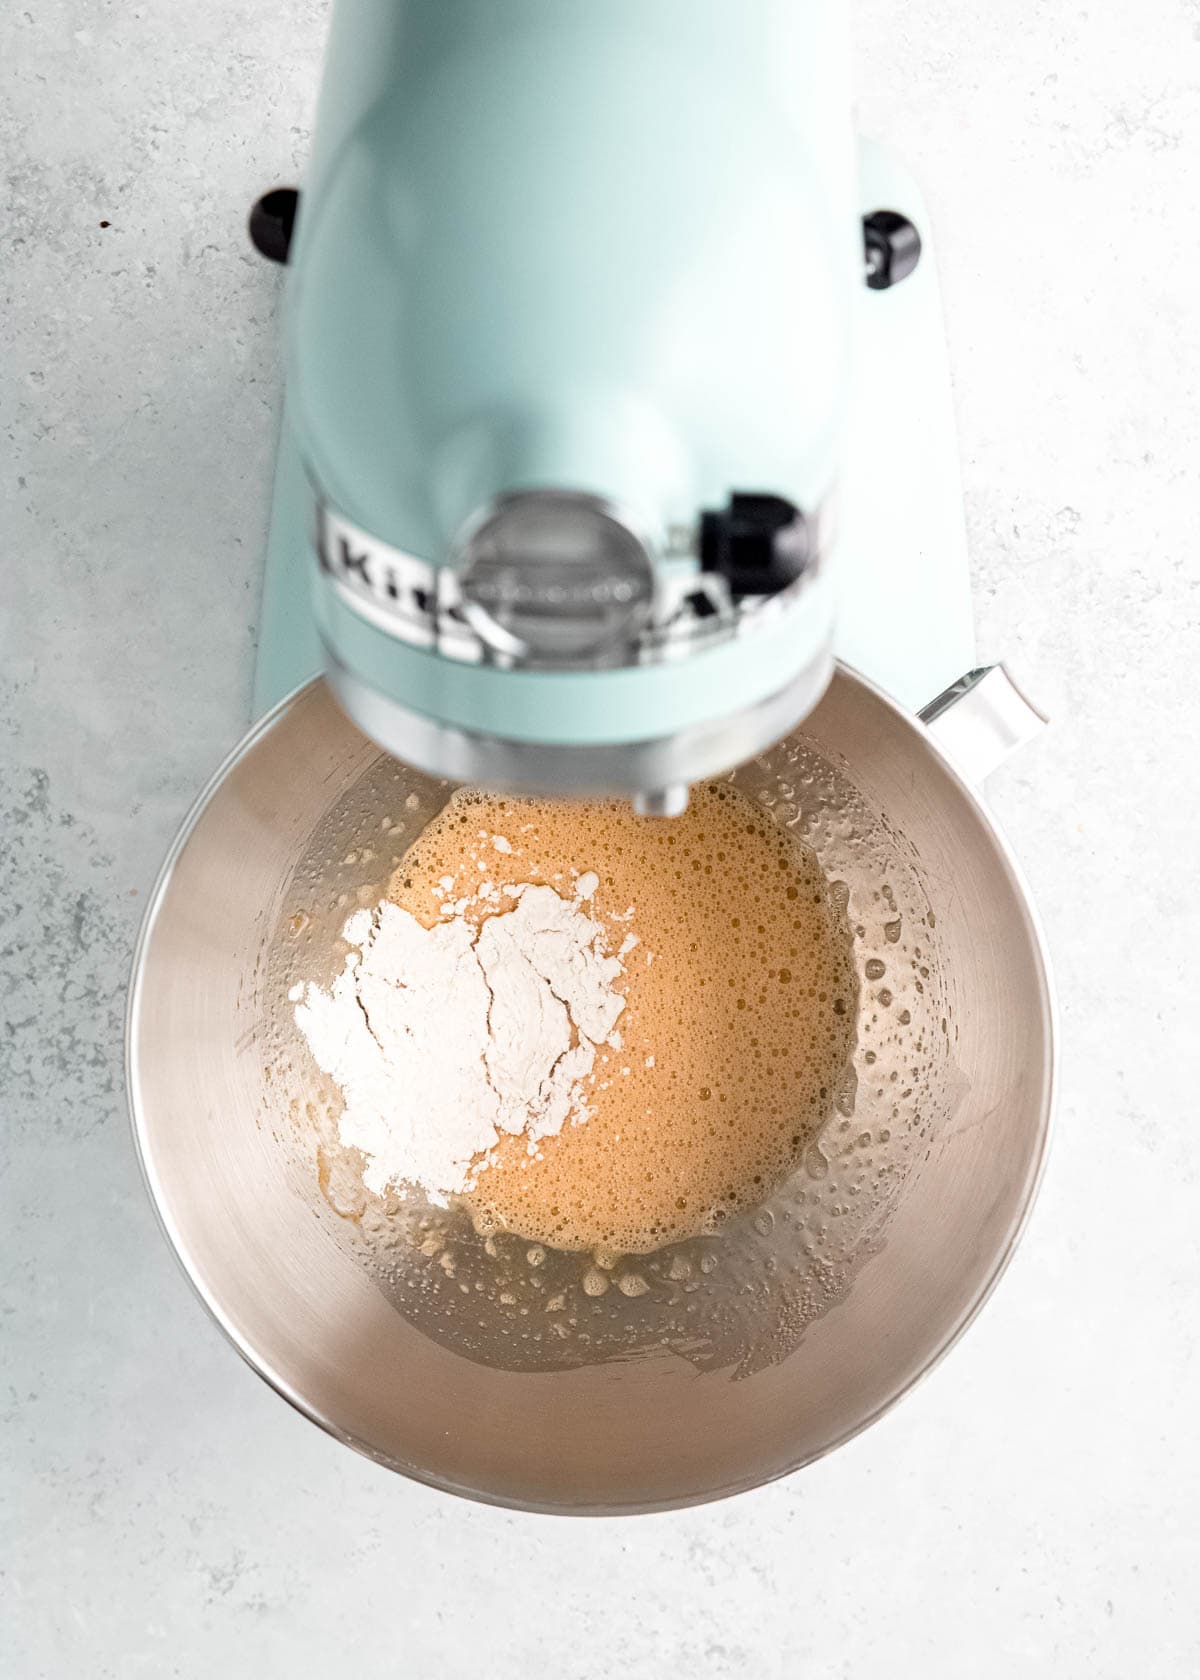 egg mixture with gluten free flour in stand mixer